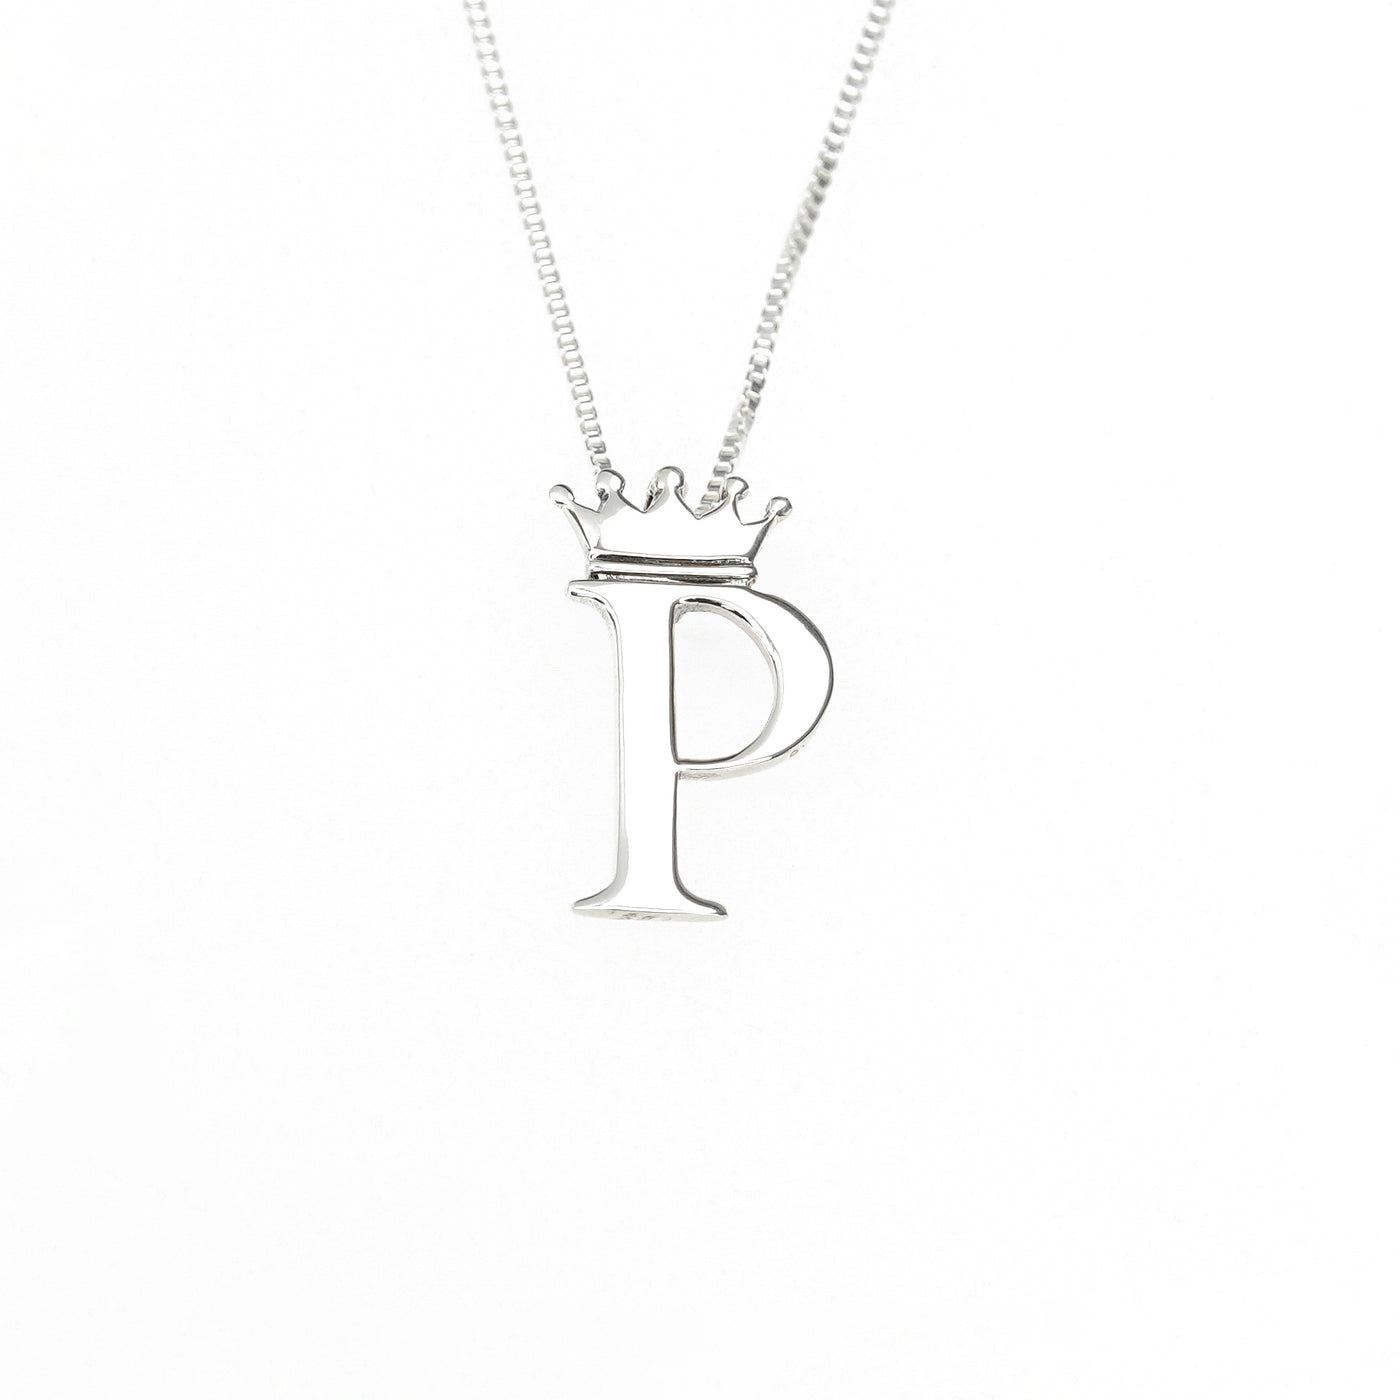 Royal Initial Charms – Cristy Cali